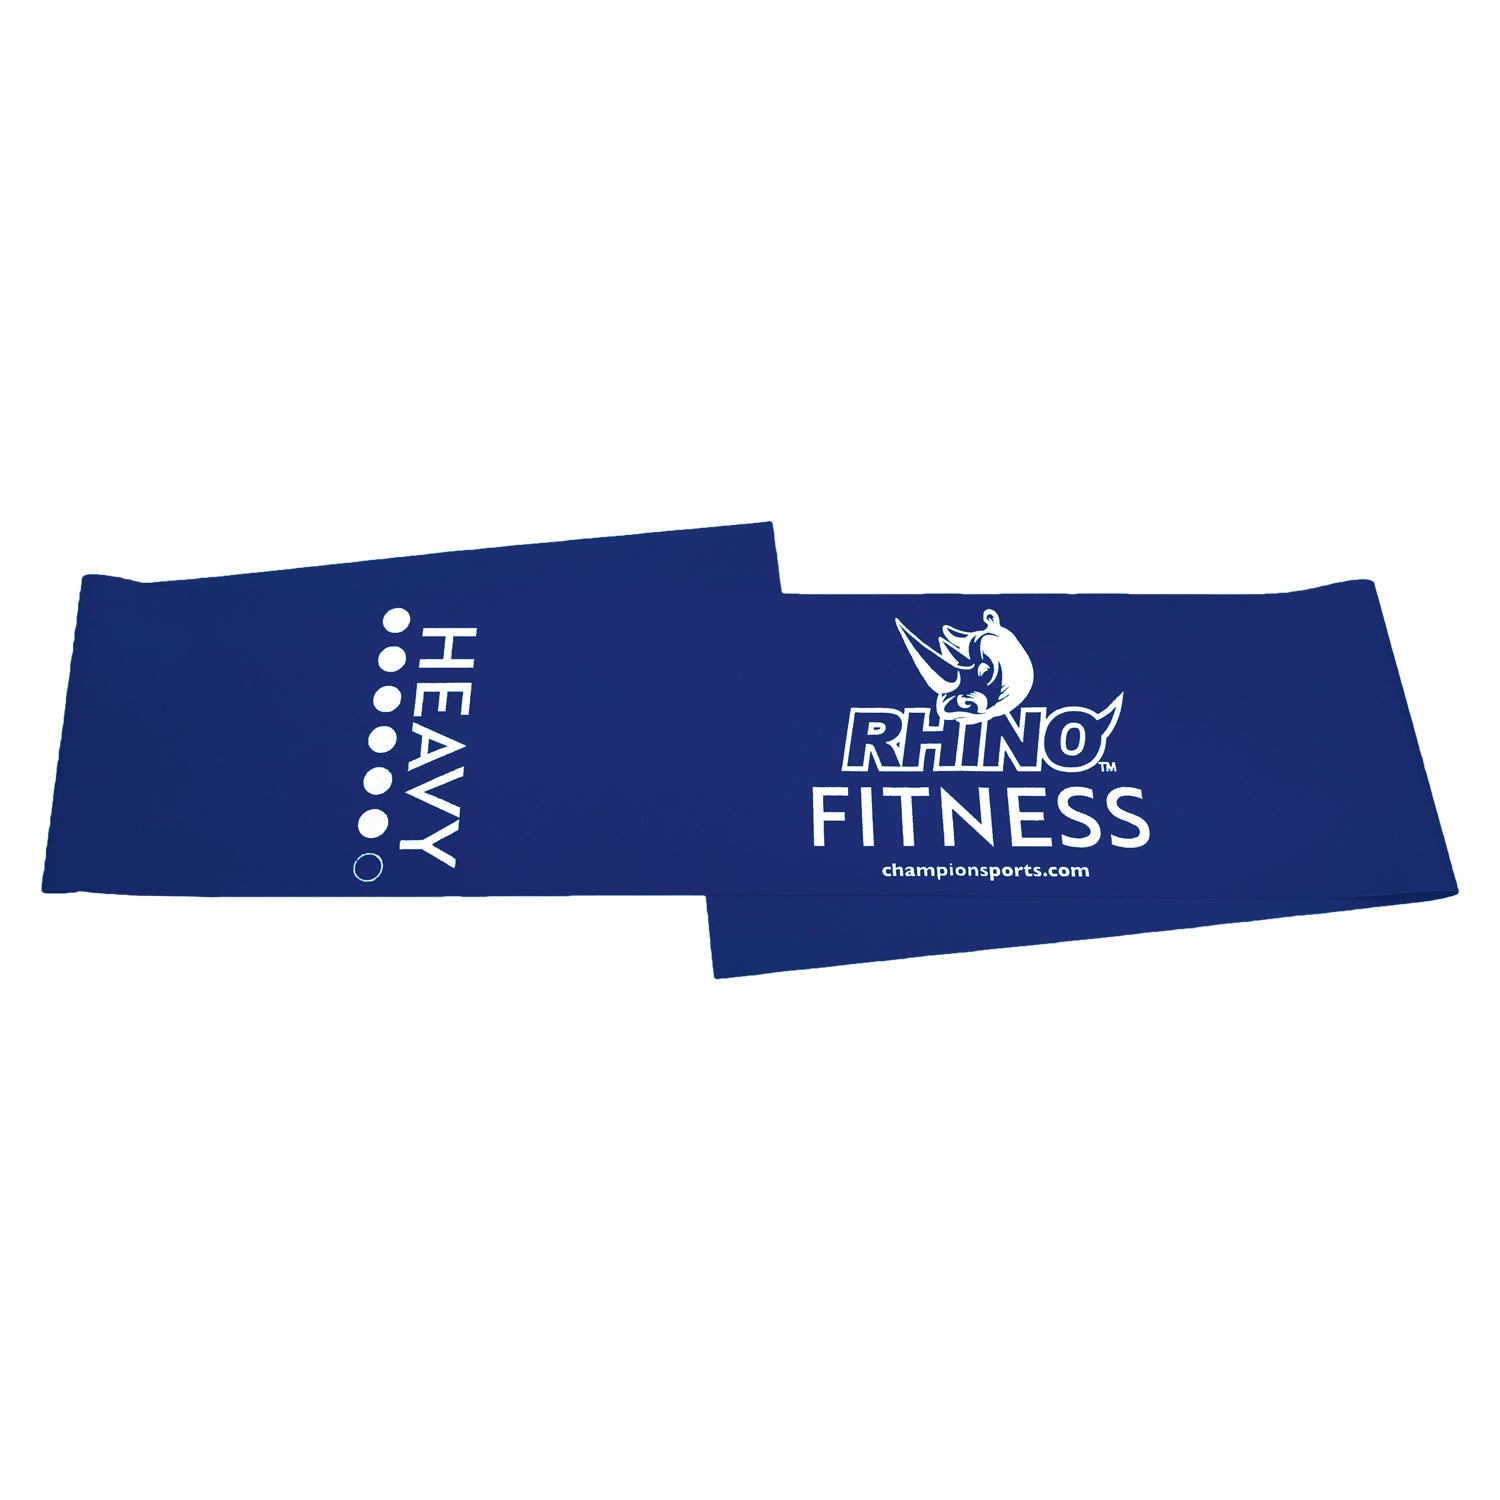 RHINO Fitness® Flat Exercise Band Series 15 lb, Heavy, Indigo RHINO Fitness fitness indoor outdoor physical therapy